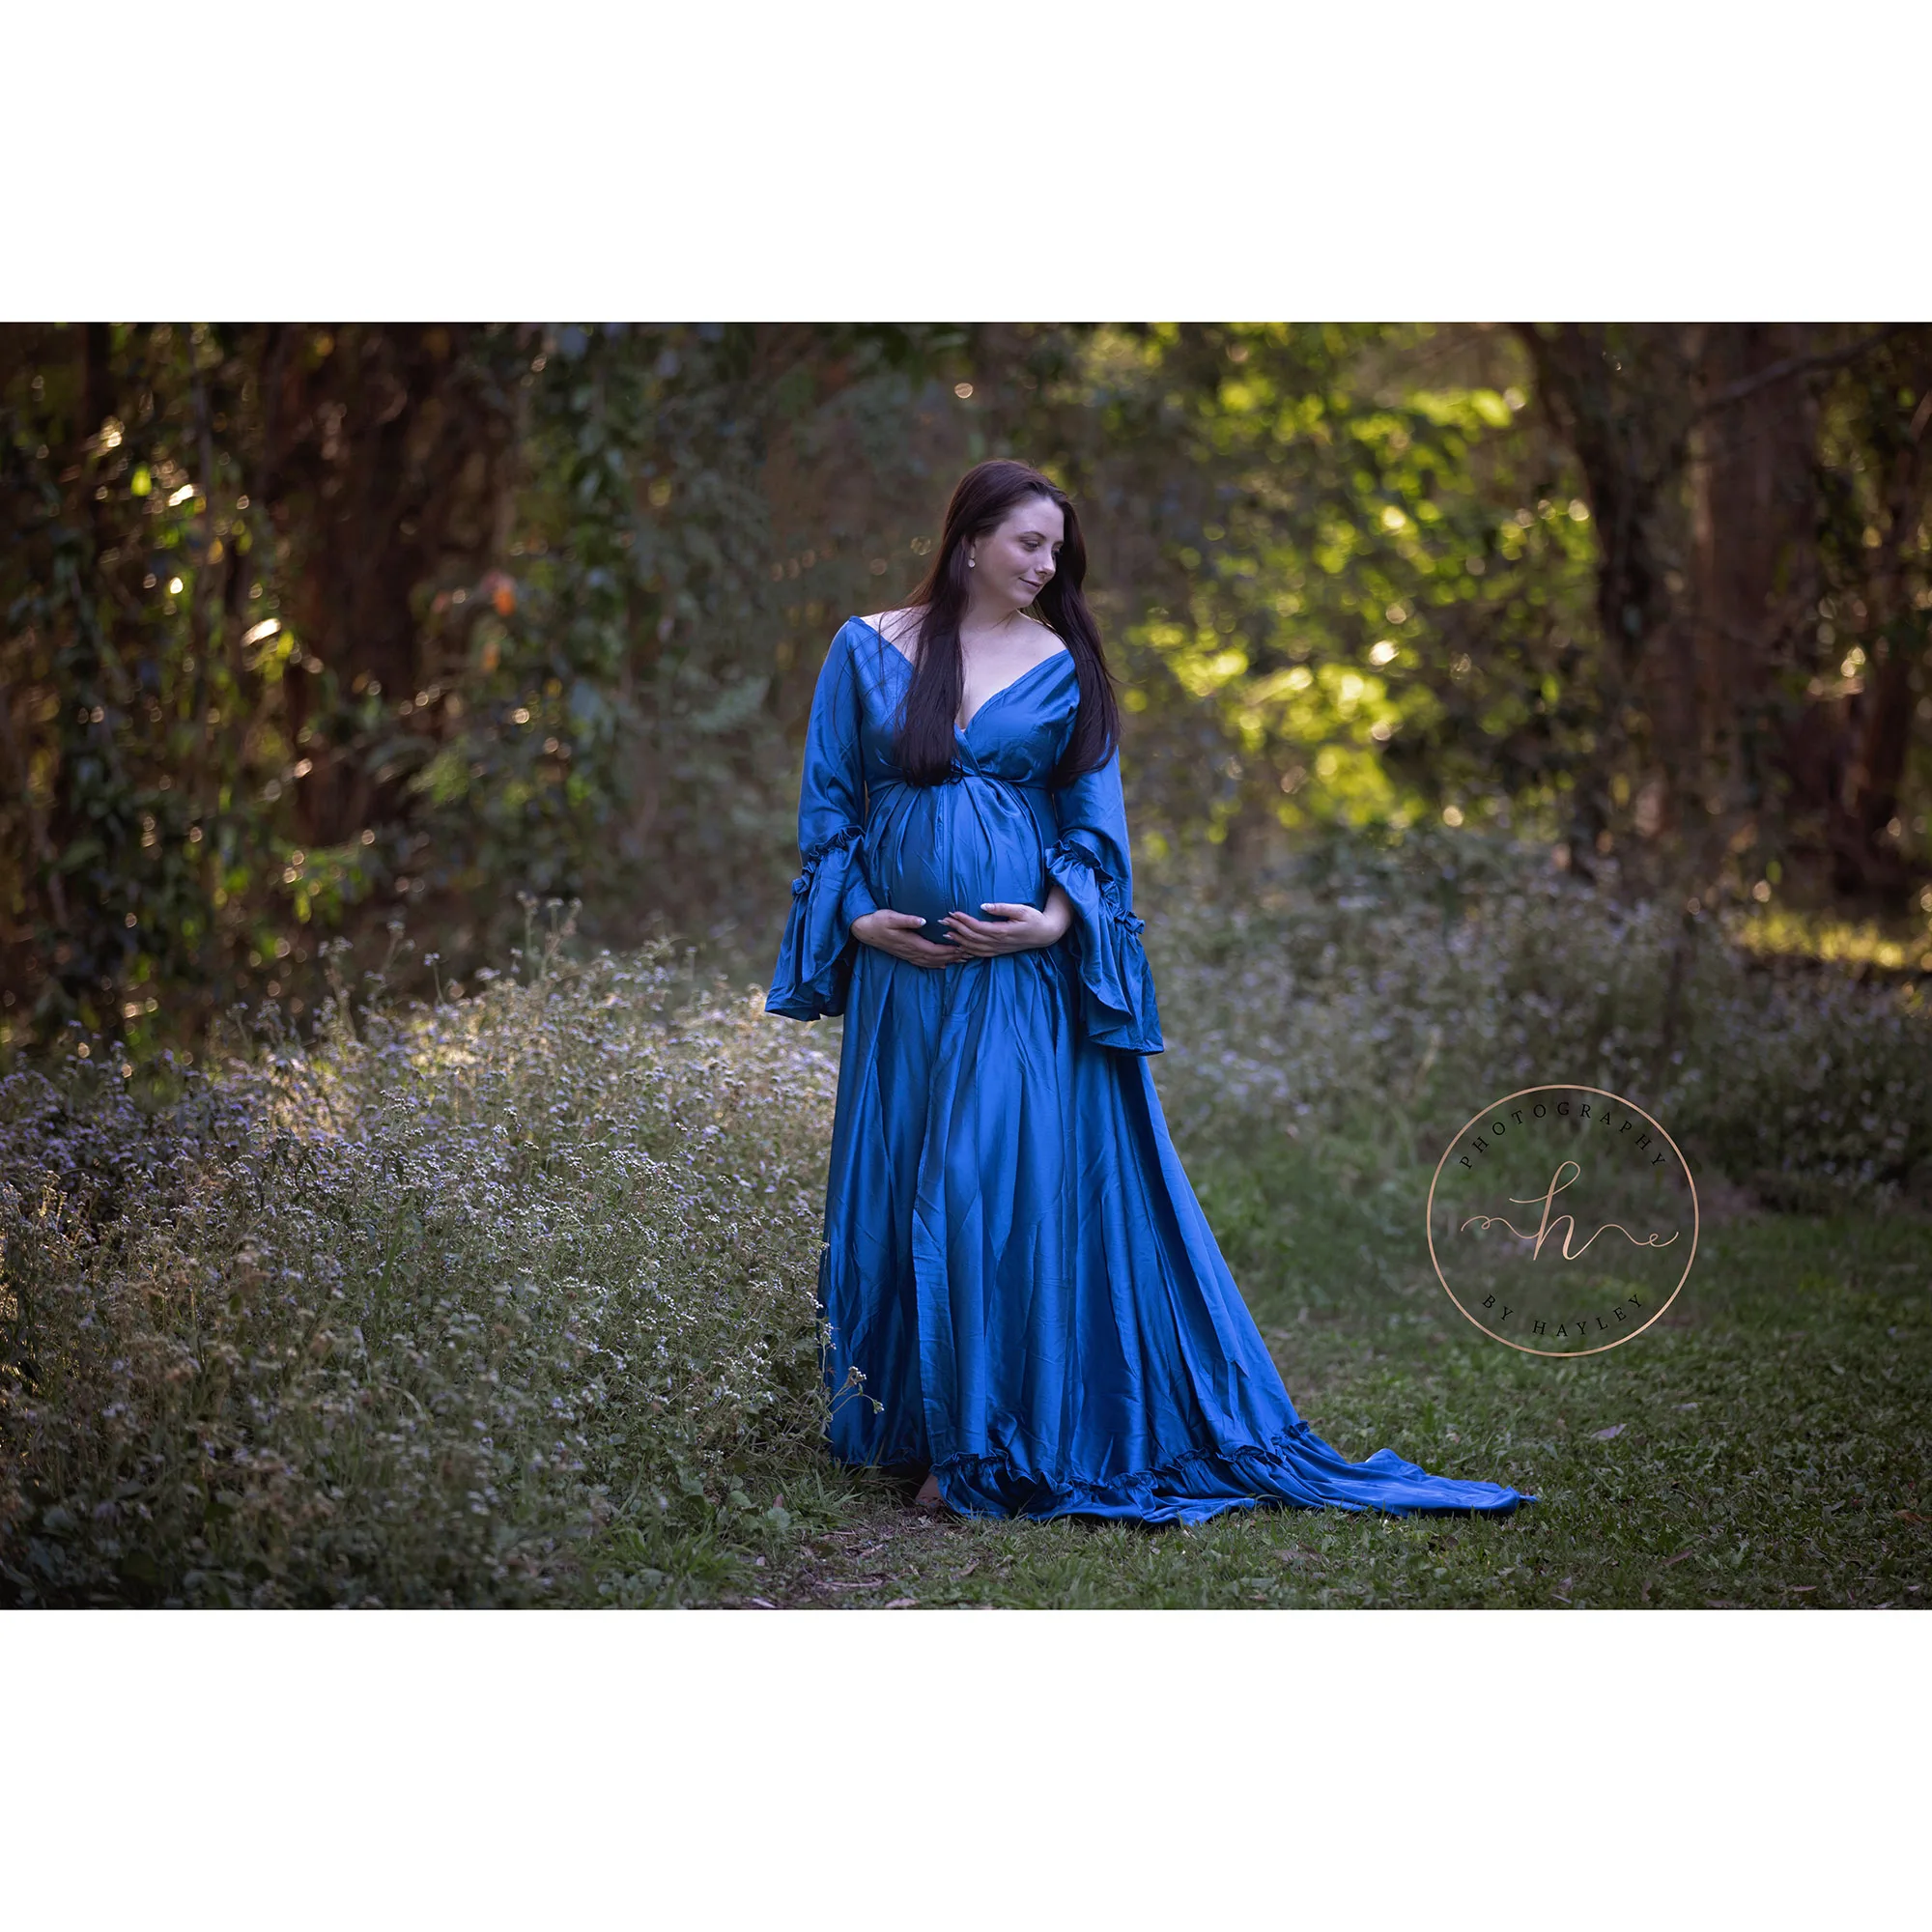 Don&Judy Silk-like Maternity Robe Photoshoot Dresses Maxi Long Pregnant Women Christmas Costume Pregnancy Photography Clothes enlarge